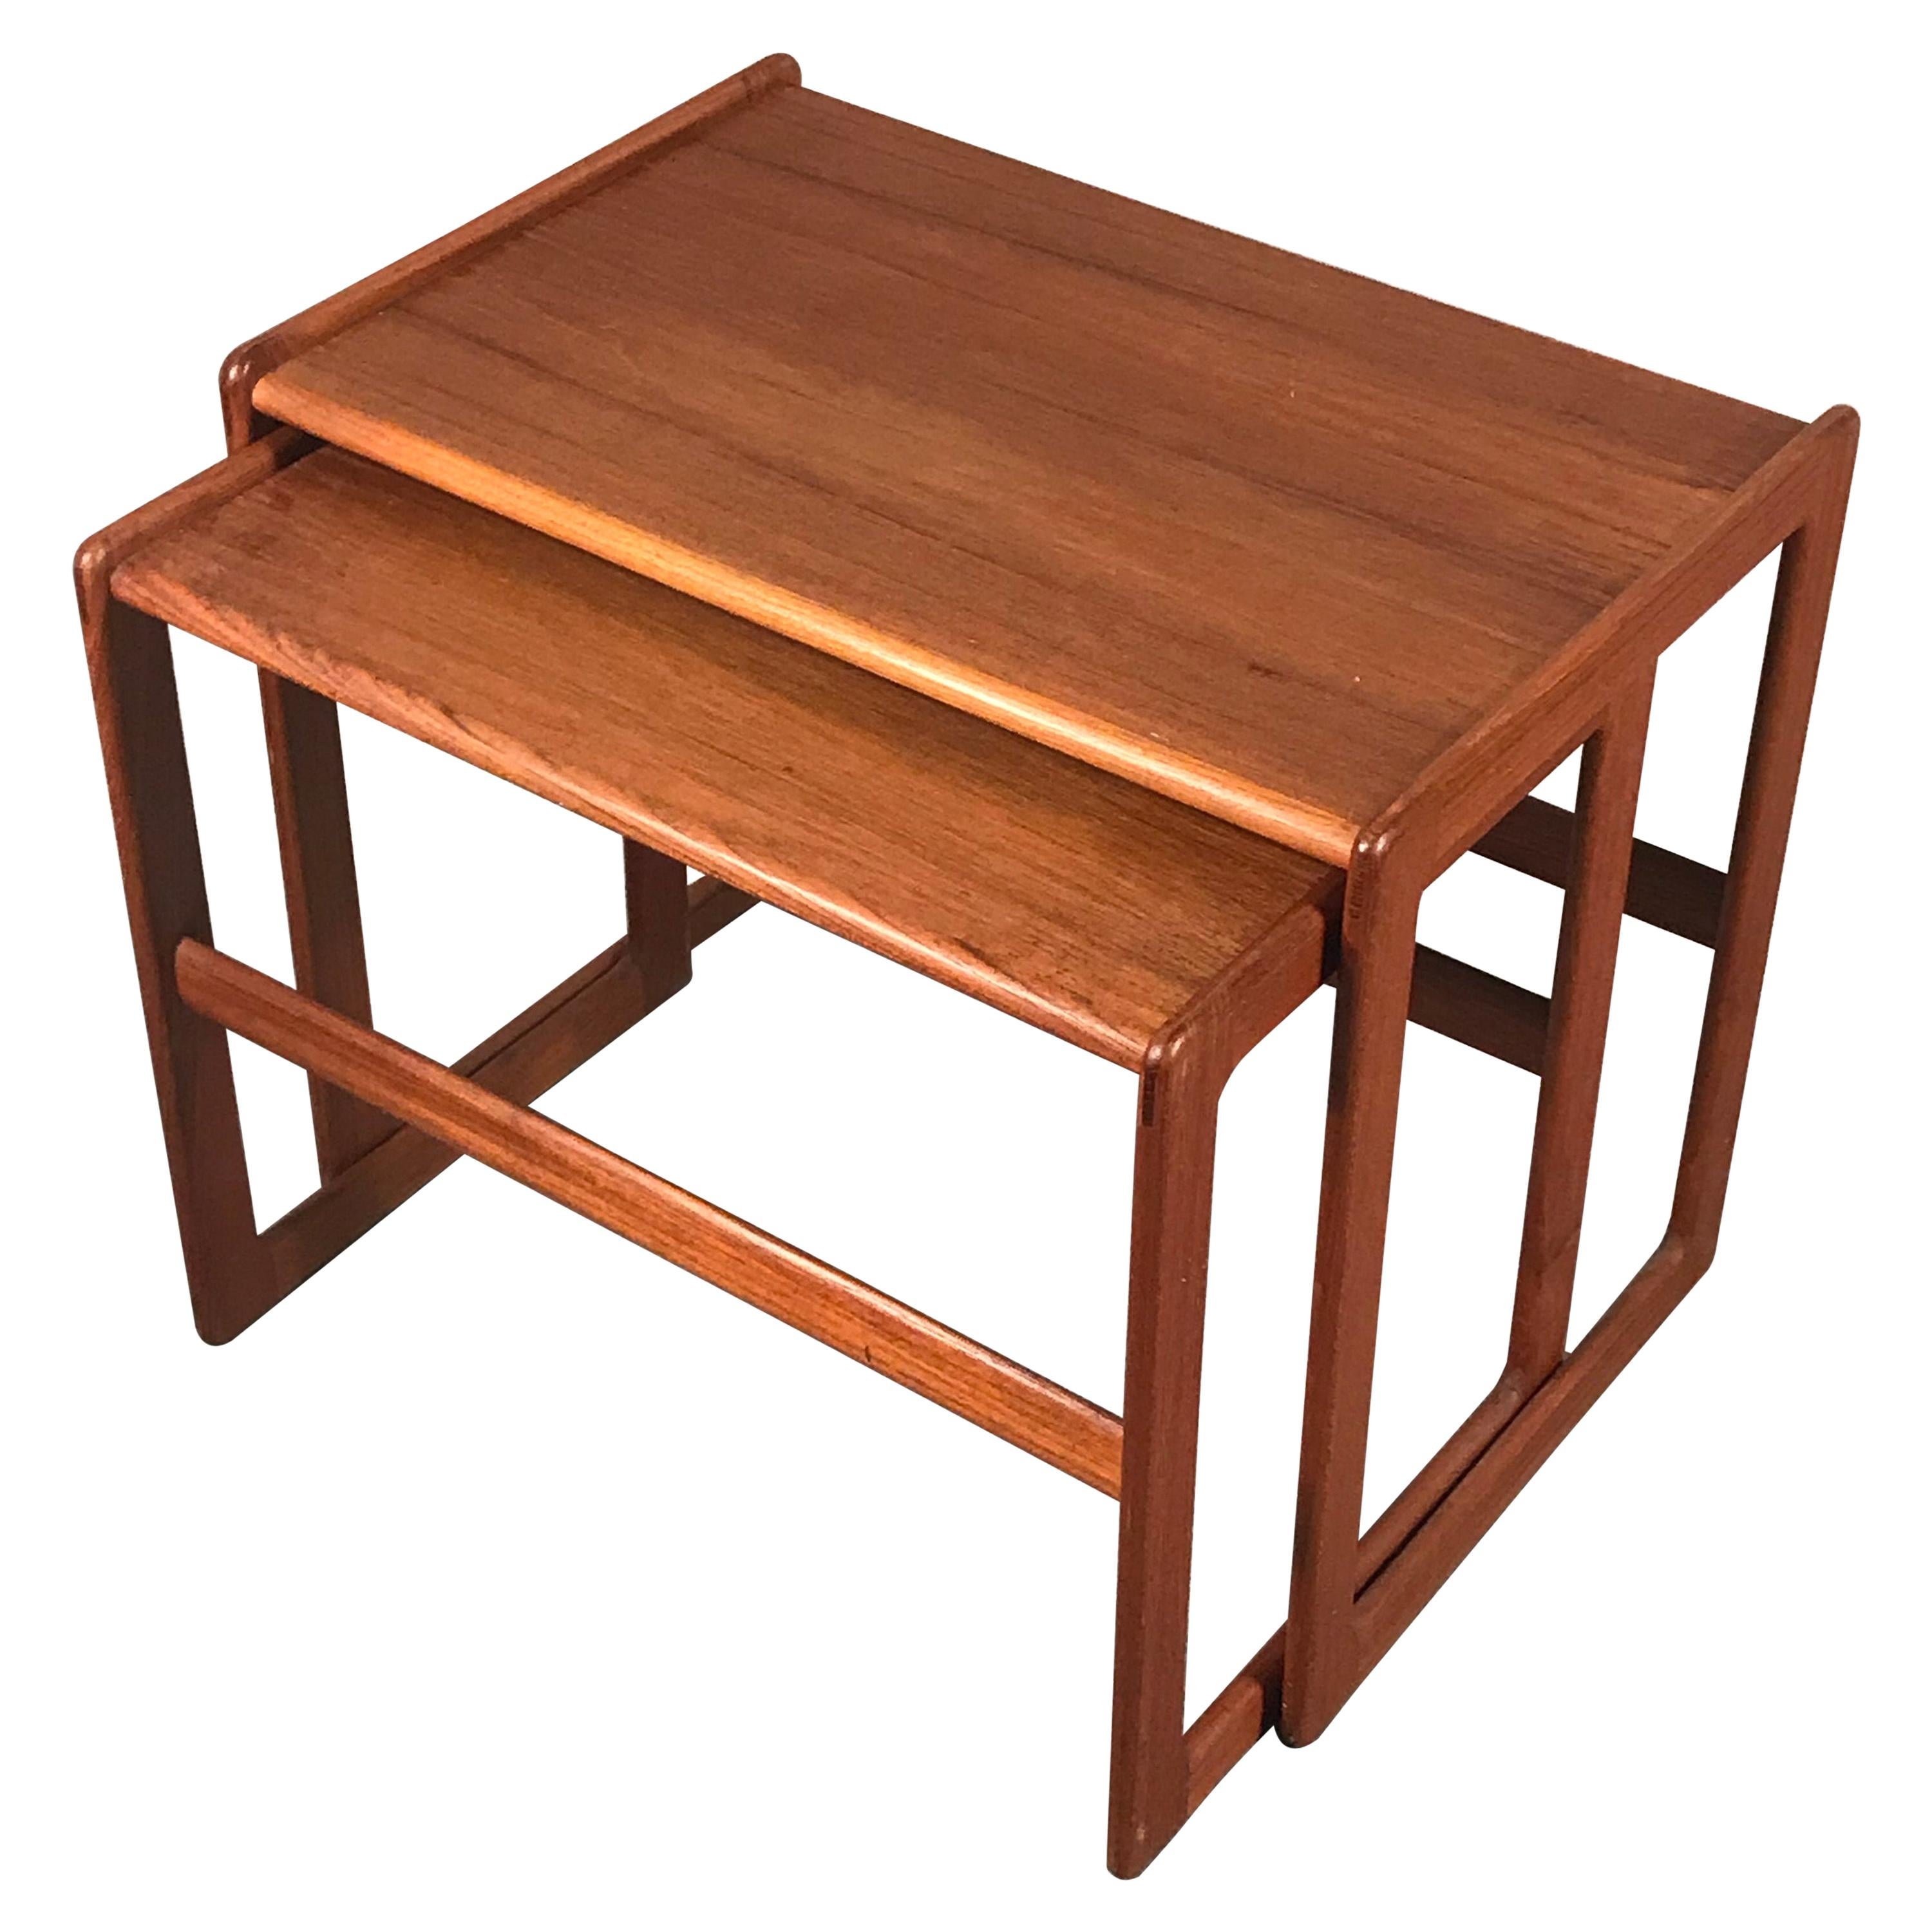 Two Original Mid-Century Nesting Tables by Morgen-Kohl, Denmark, 1960's For Sale